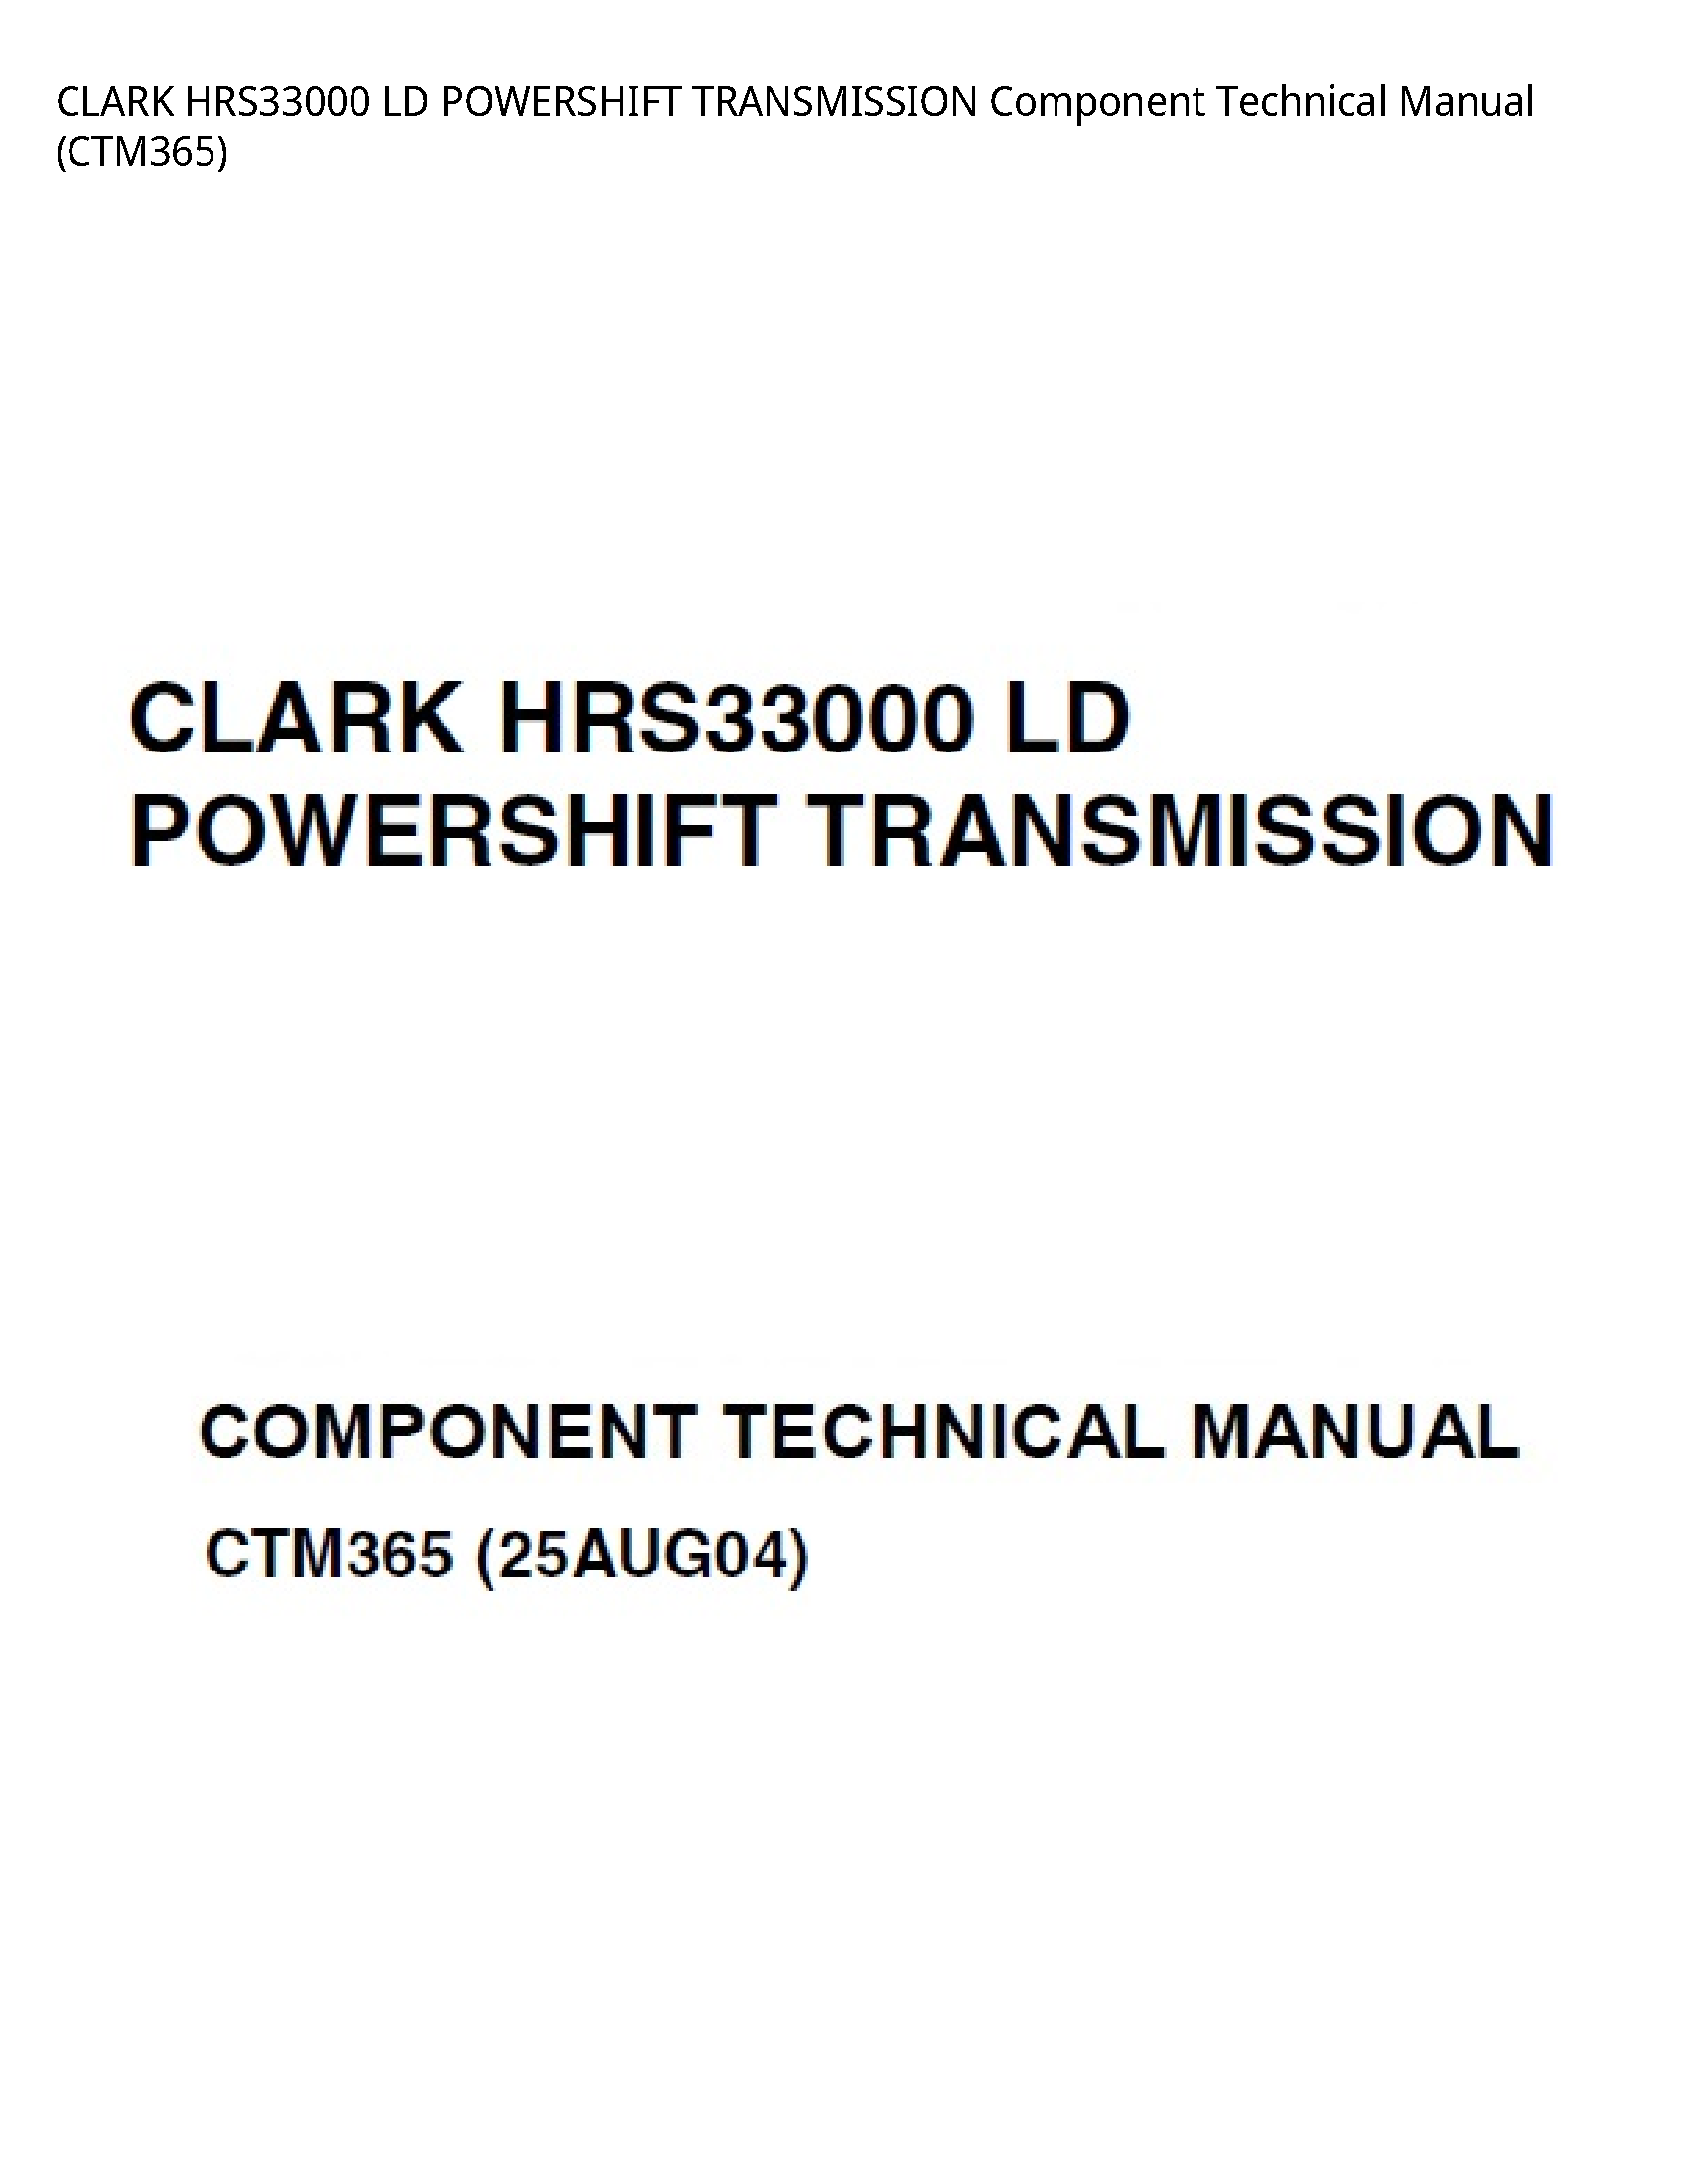 Clark HRS33000 LD POWERSHIFT TRANSMISSION Component Technical manual